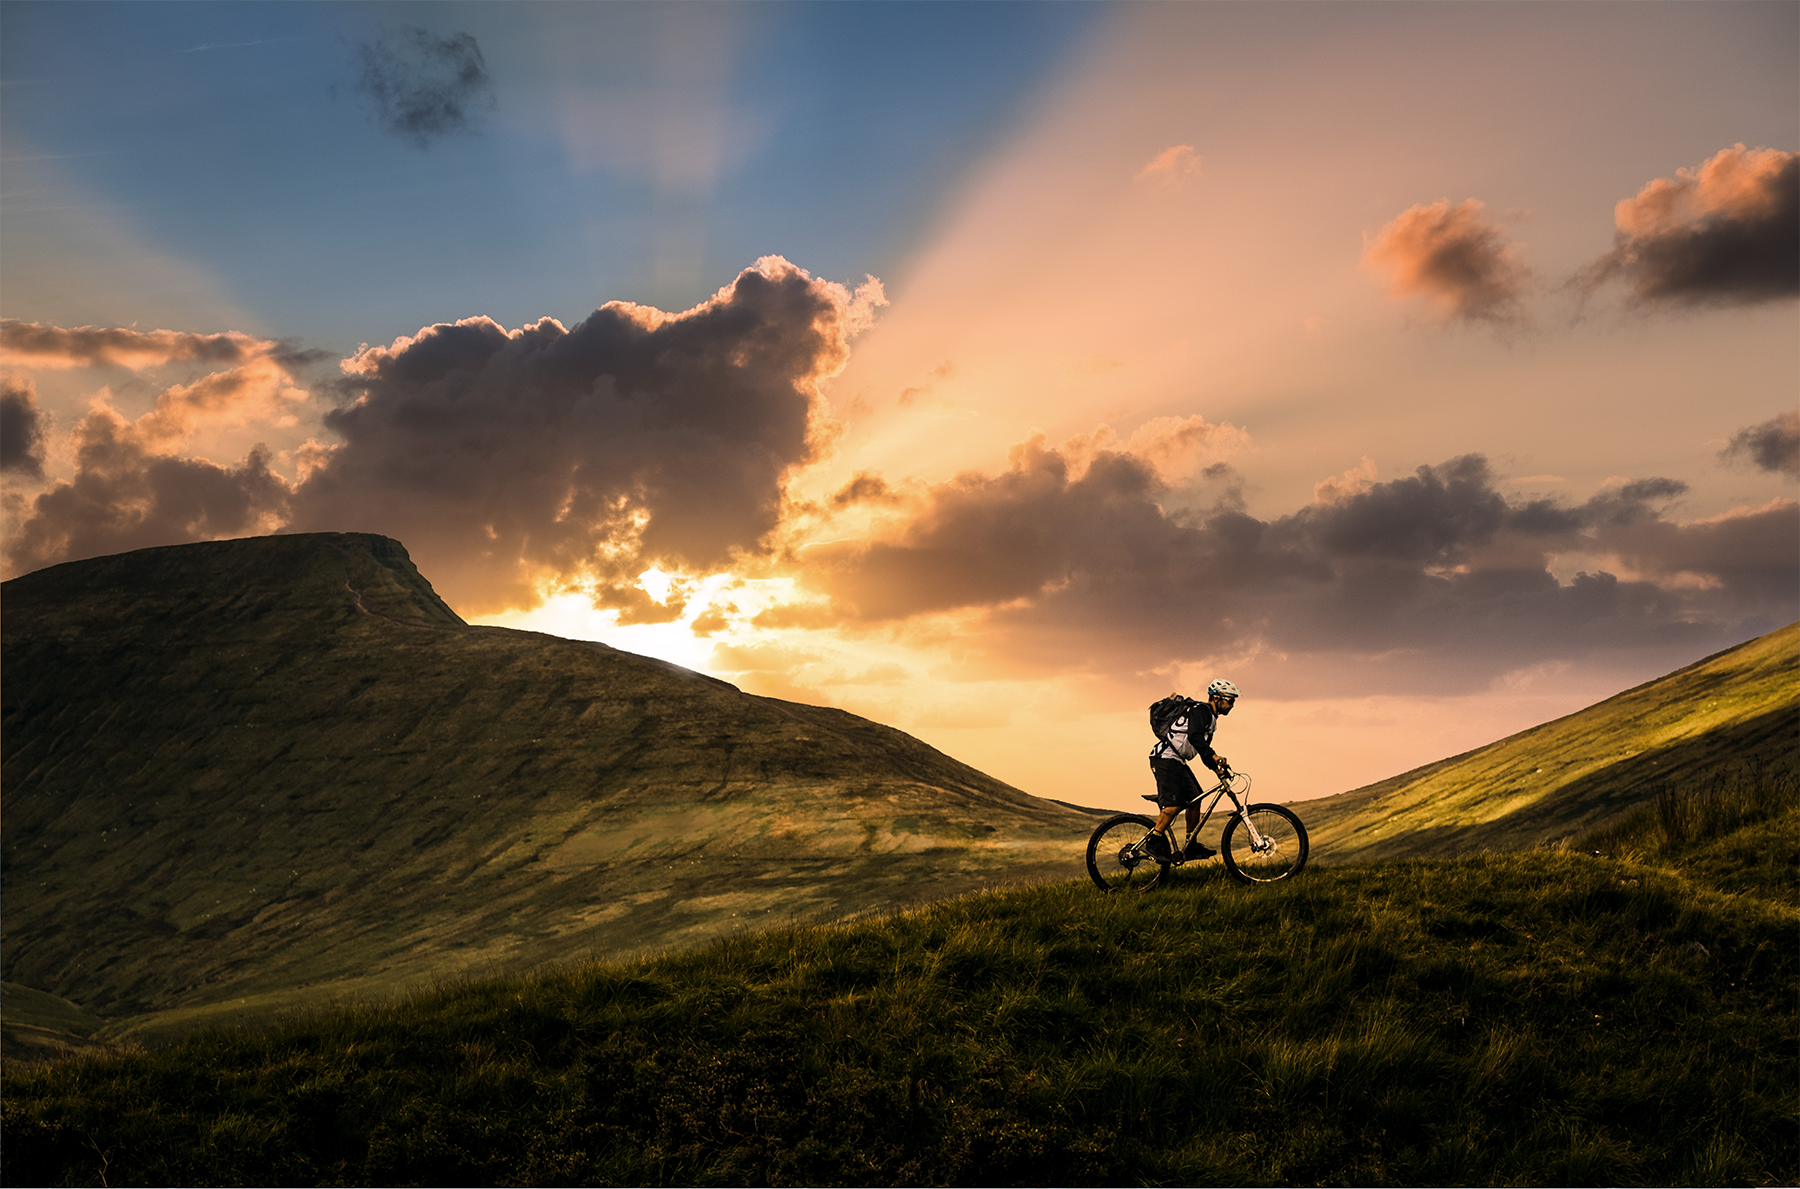 Mountain biker at sunset in the Brecon Beacons, Wales-1.png